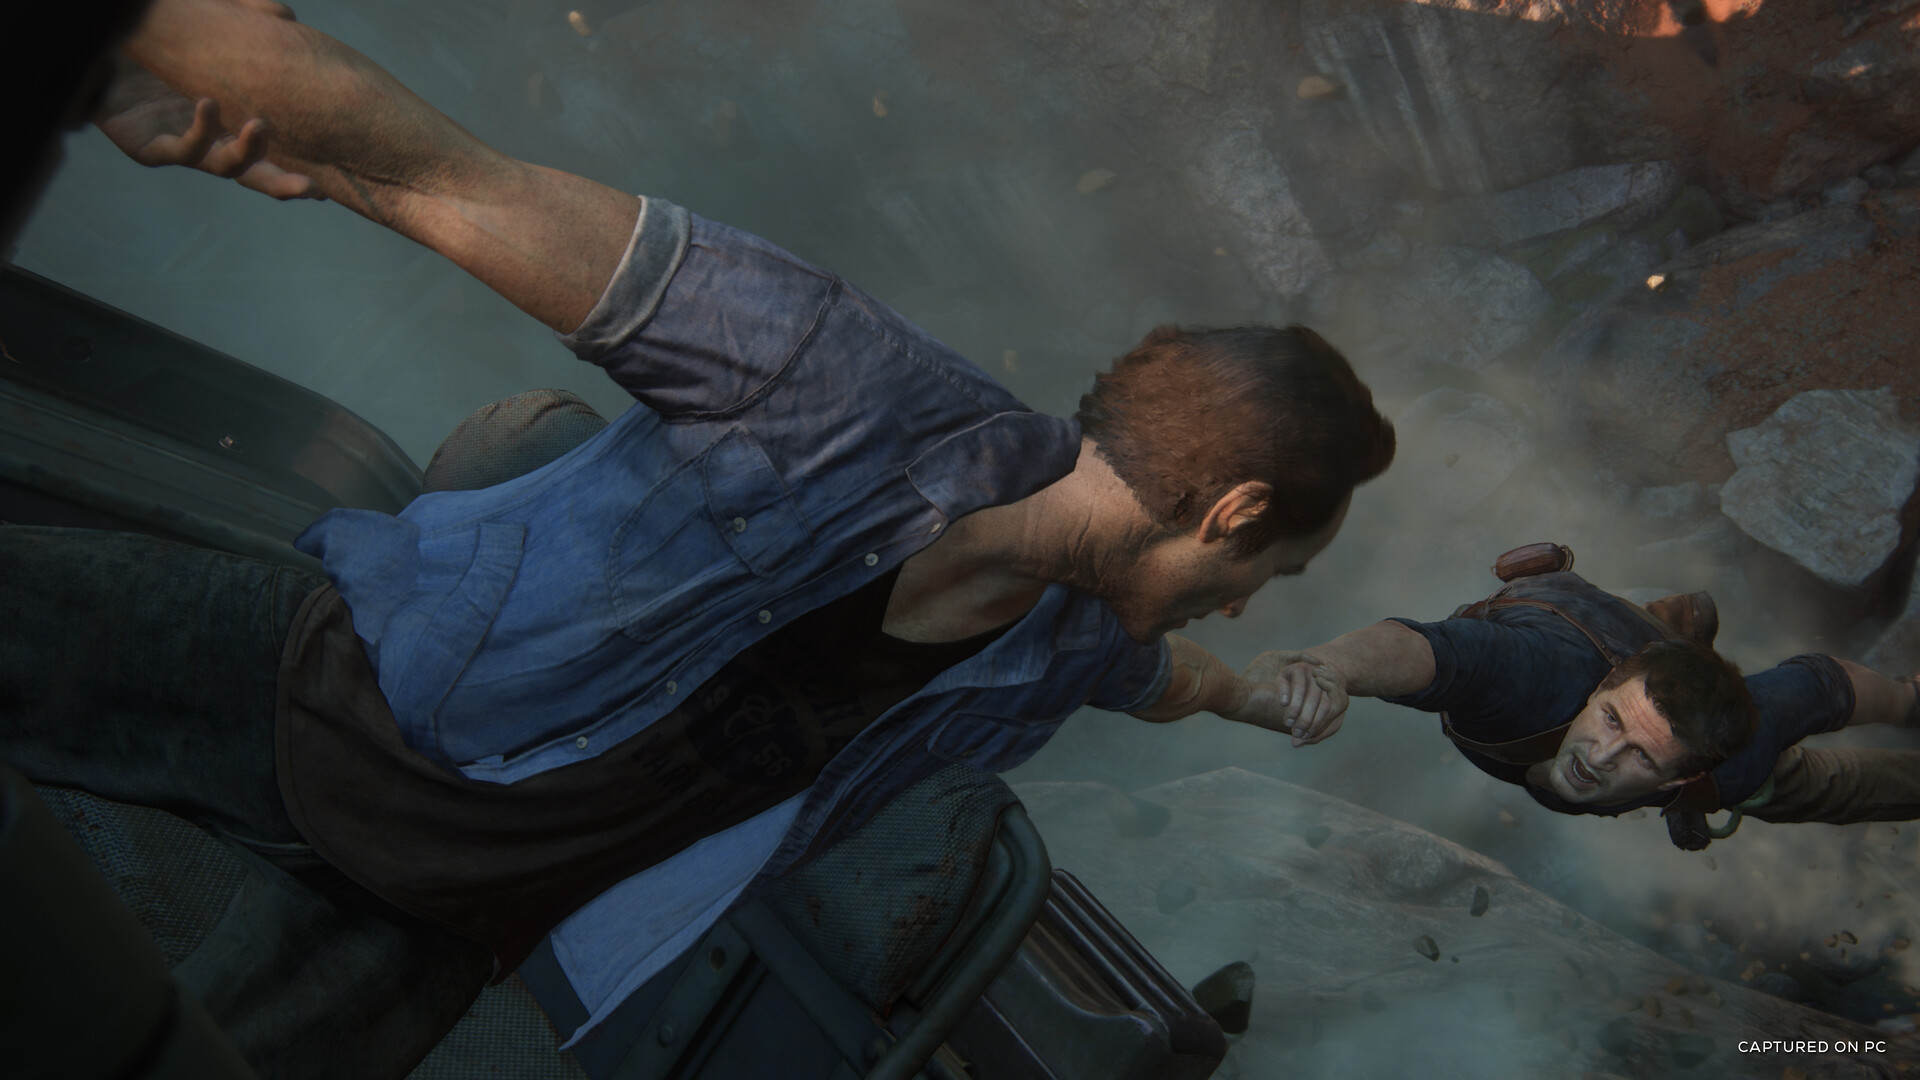 Official PC system requirements for Uncharted: Legacy of Thieves Collection